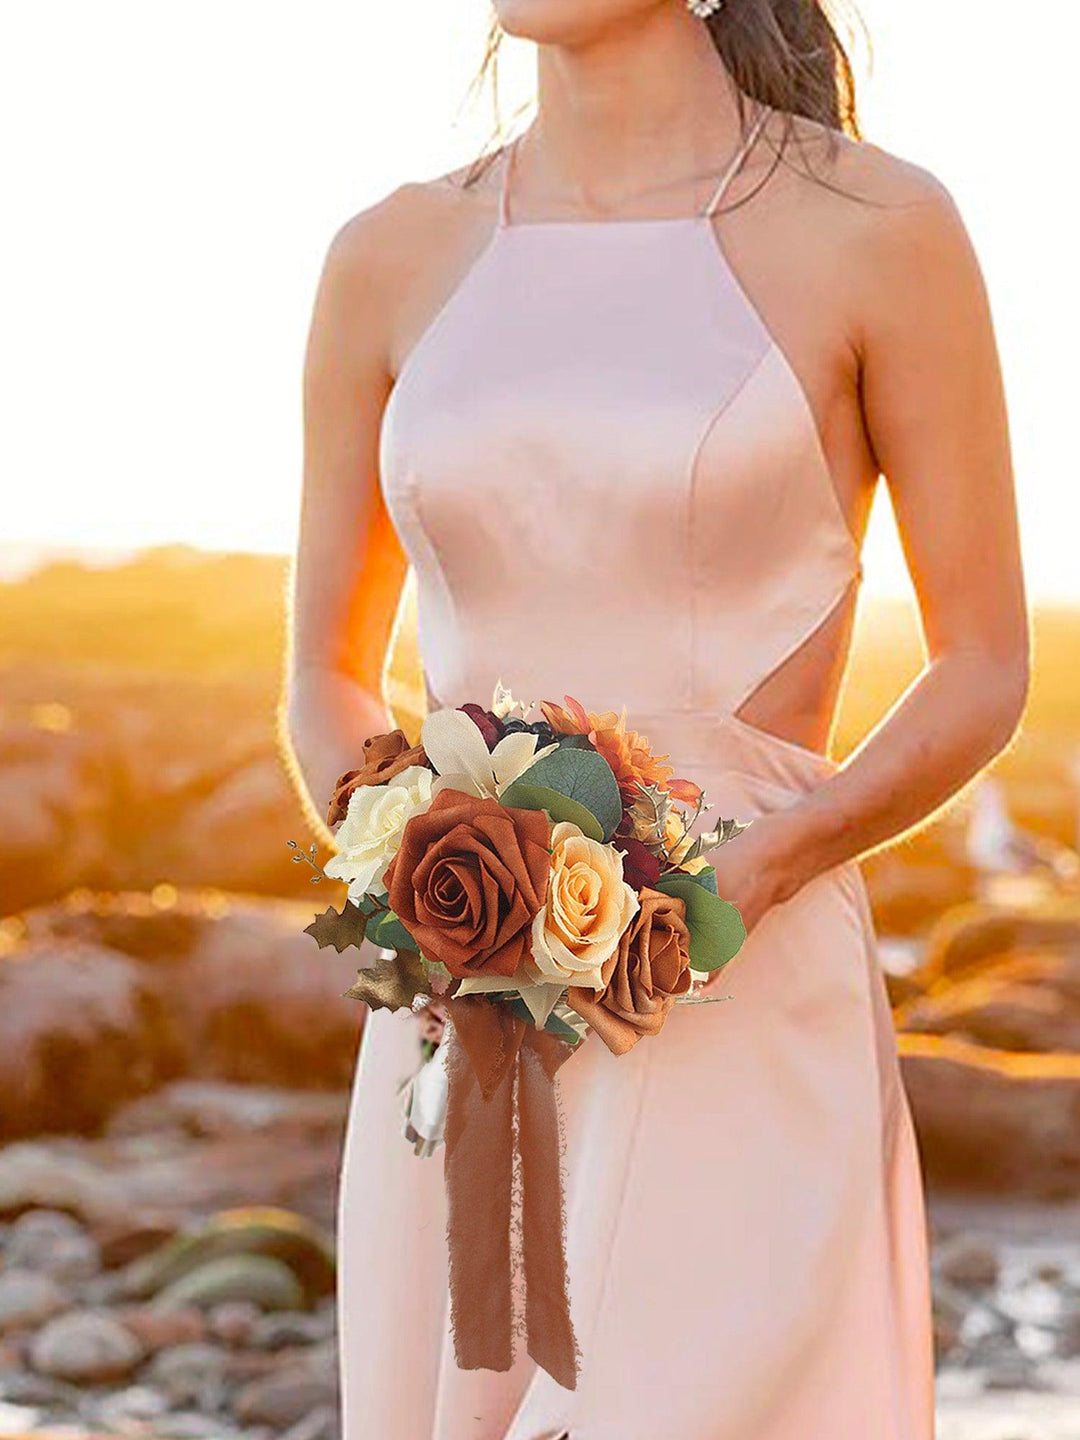 10 Stunning Autumn Wedding Flowers You'll Fall in Love With